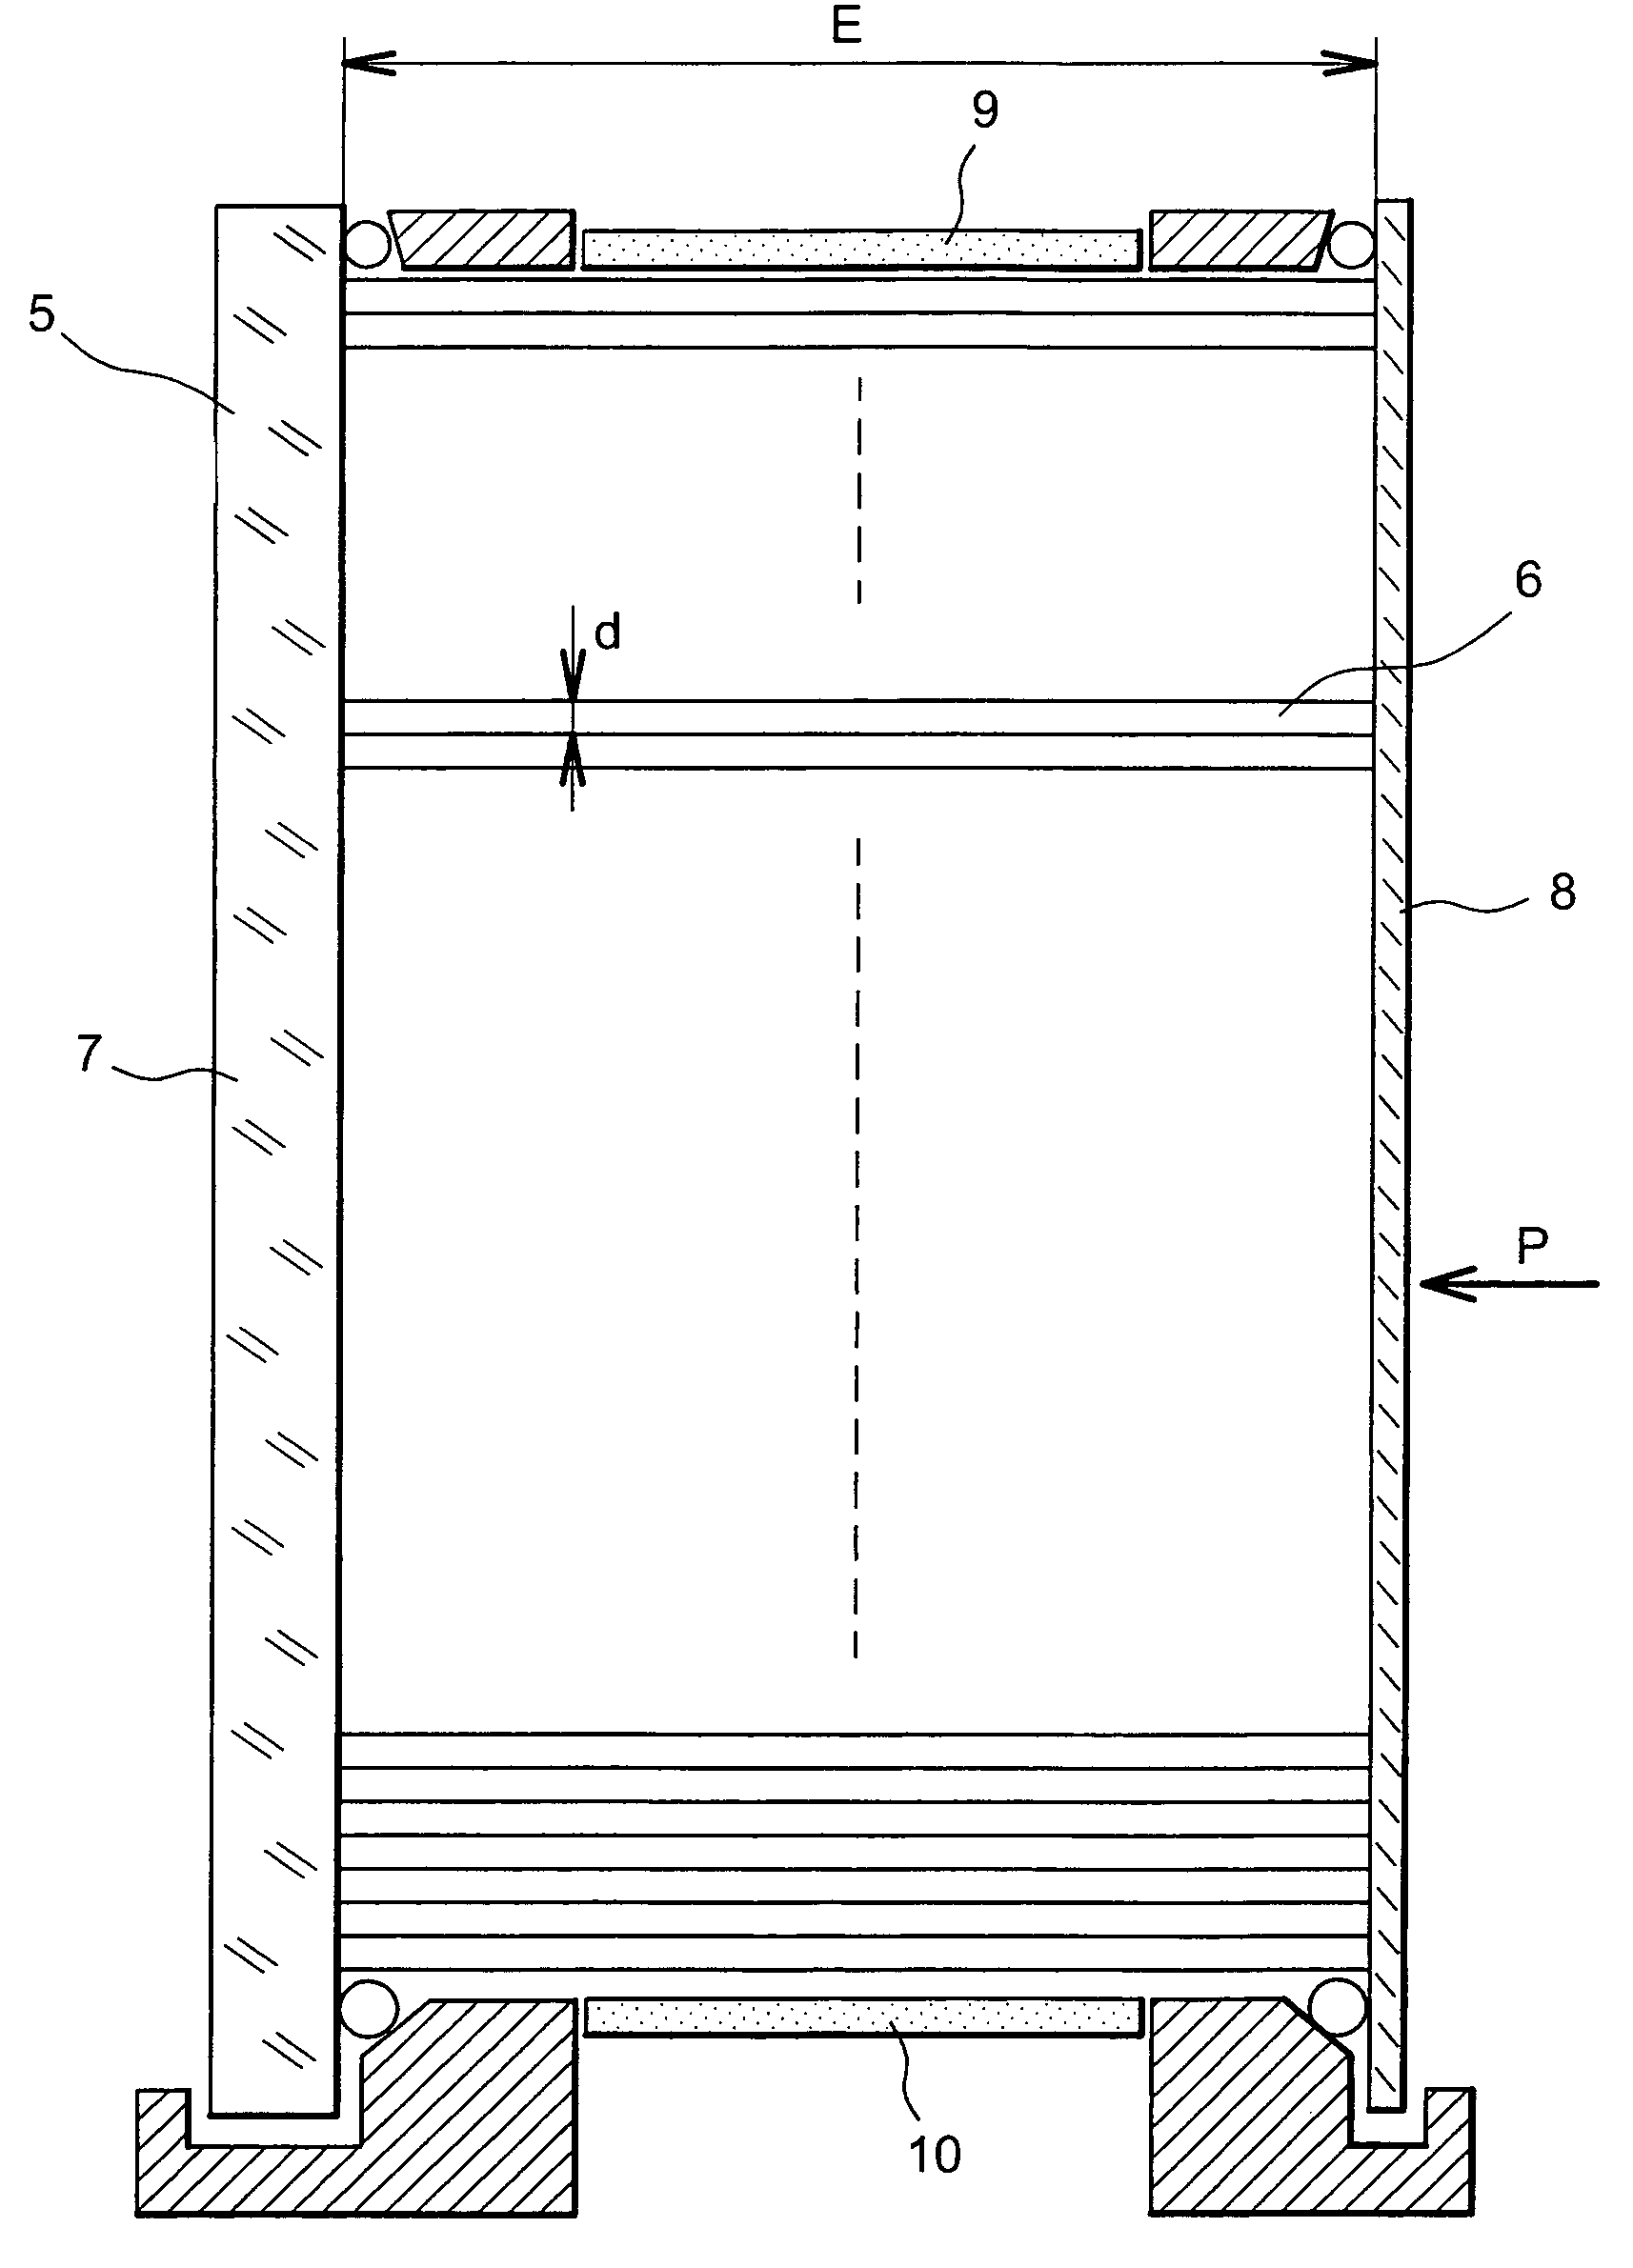 Two-dimensional ionising particle detector